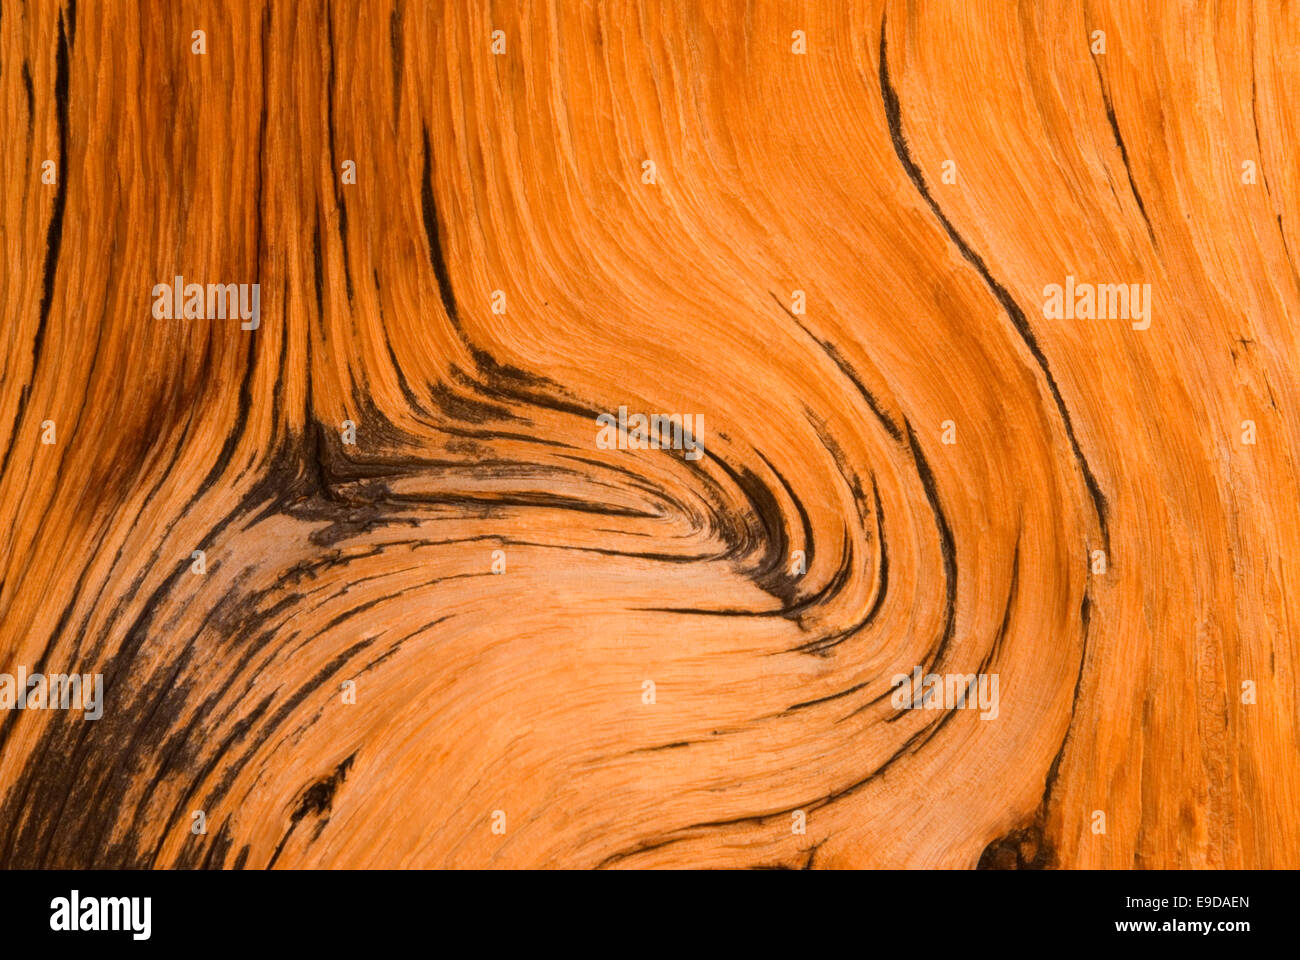 Bristlecone pine wood, Ancient Bristlecone Pine Forest, Inyo National Forest, California Stock Photo